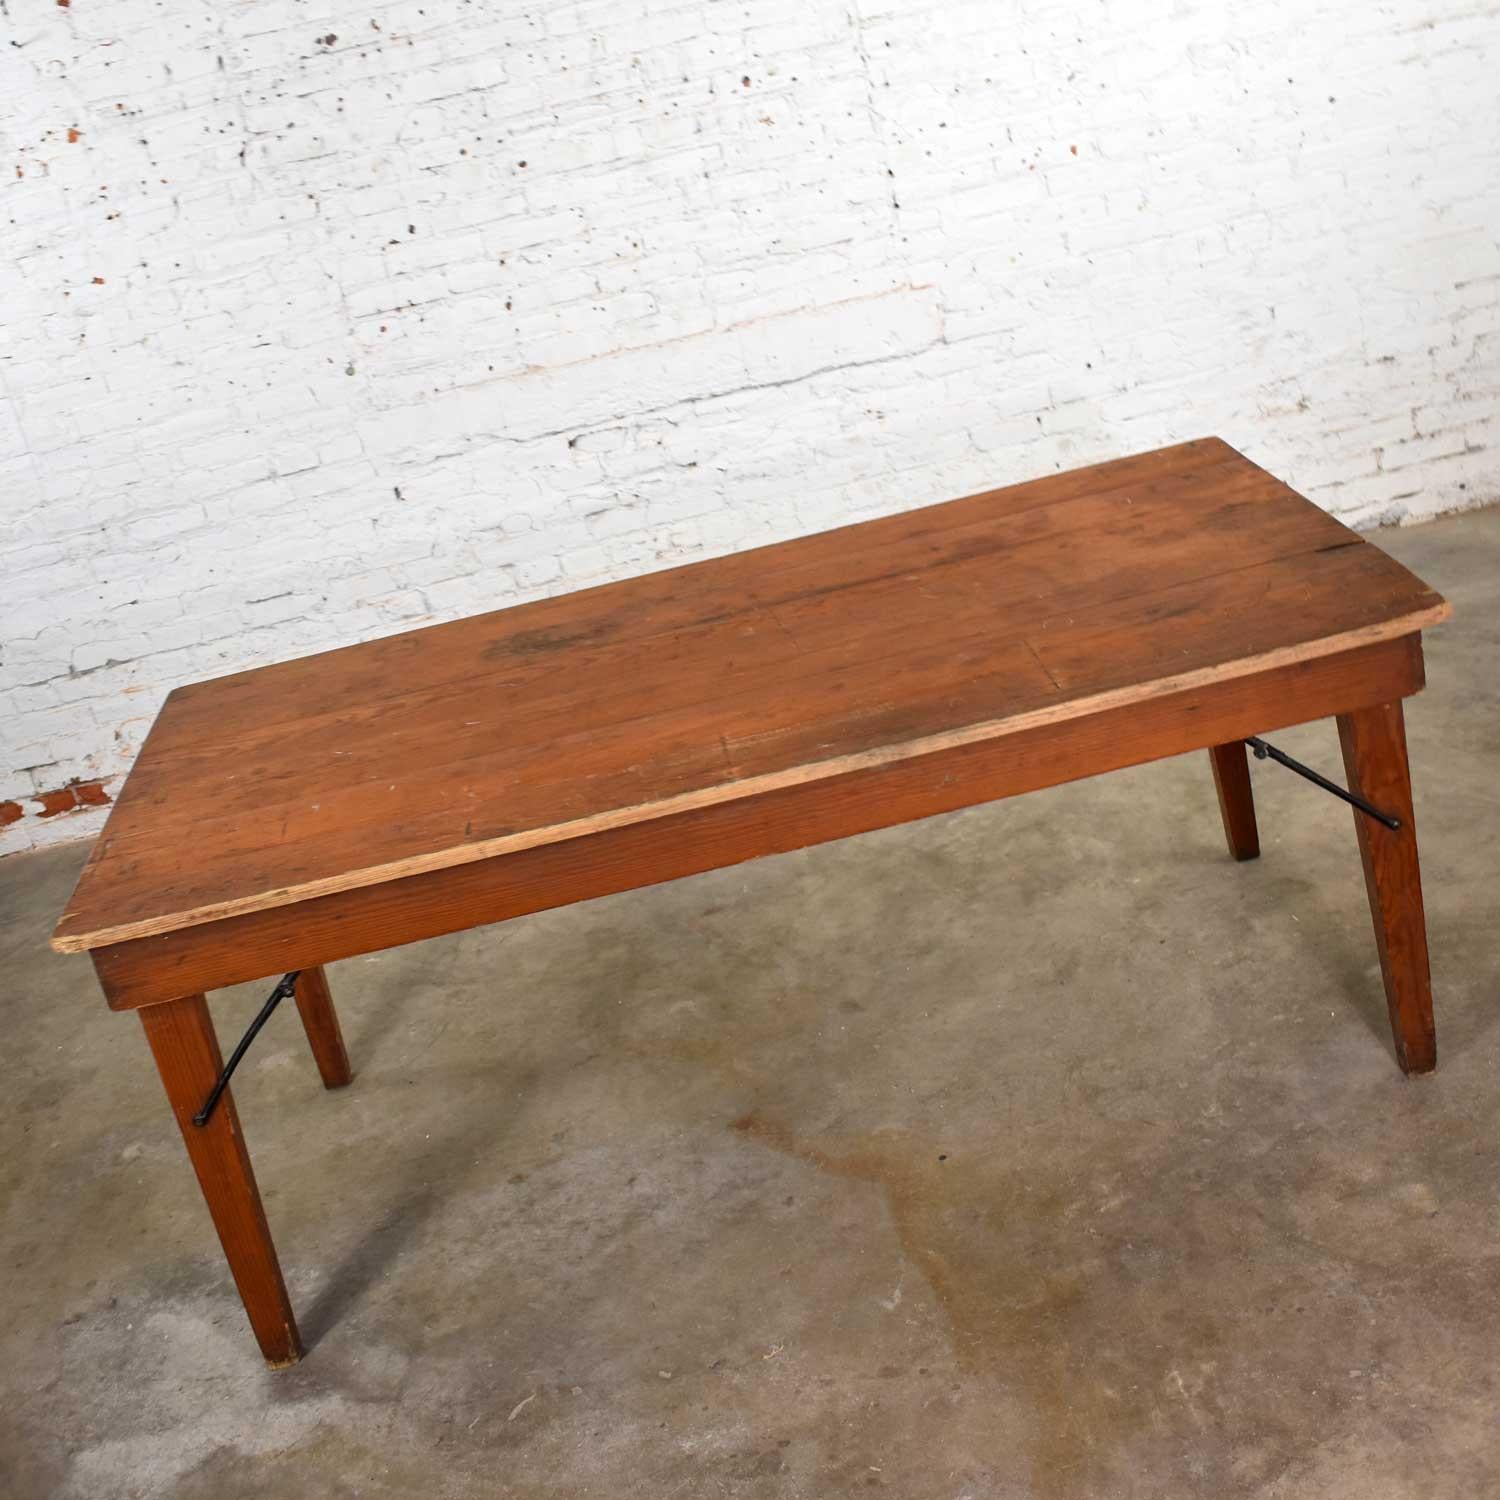 Unknown Vintage Pine Industrial Rustic Worktable or Farmhouse Table with Folding Legs